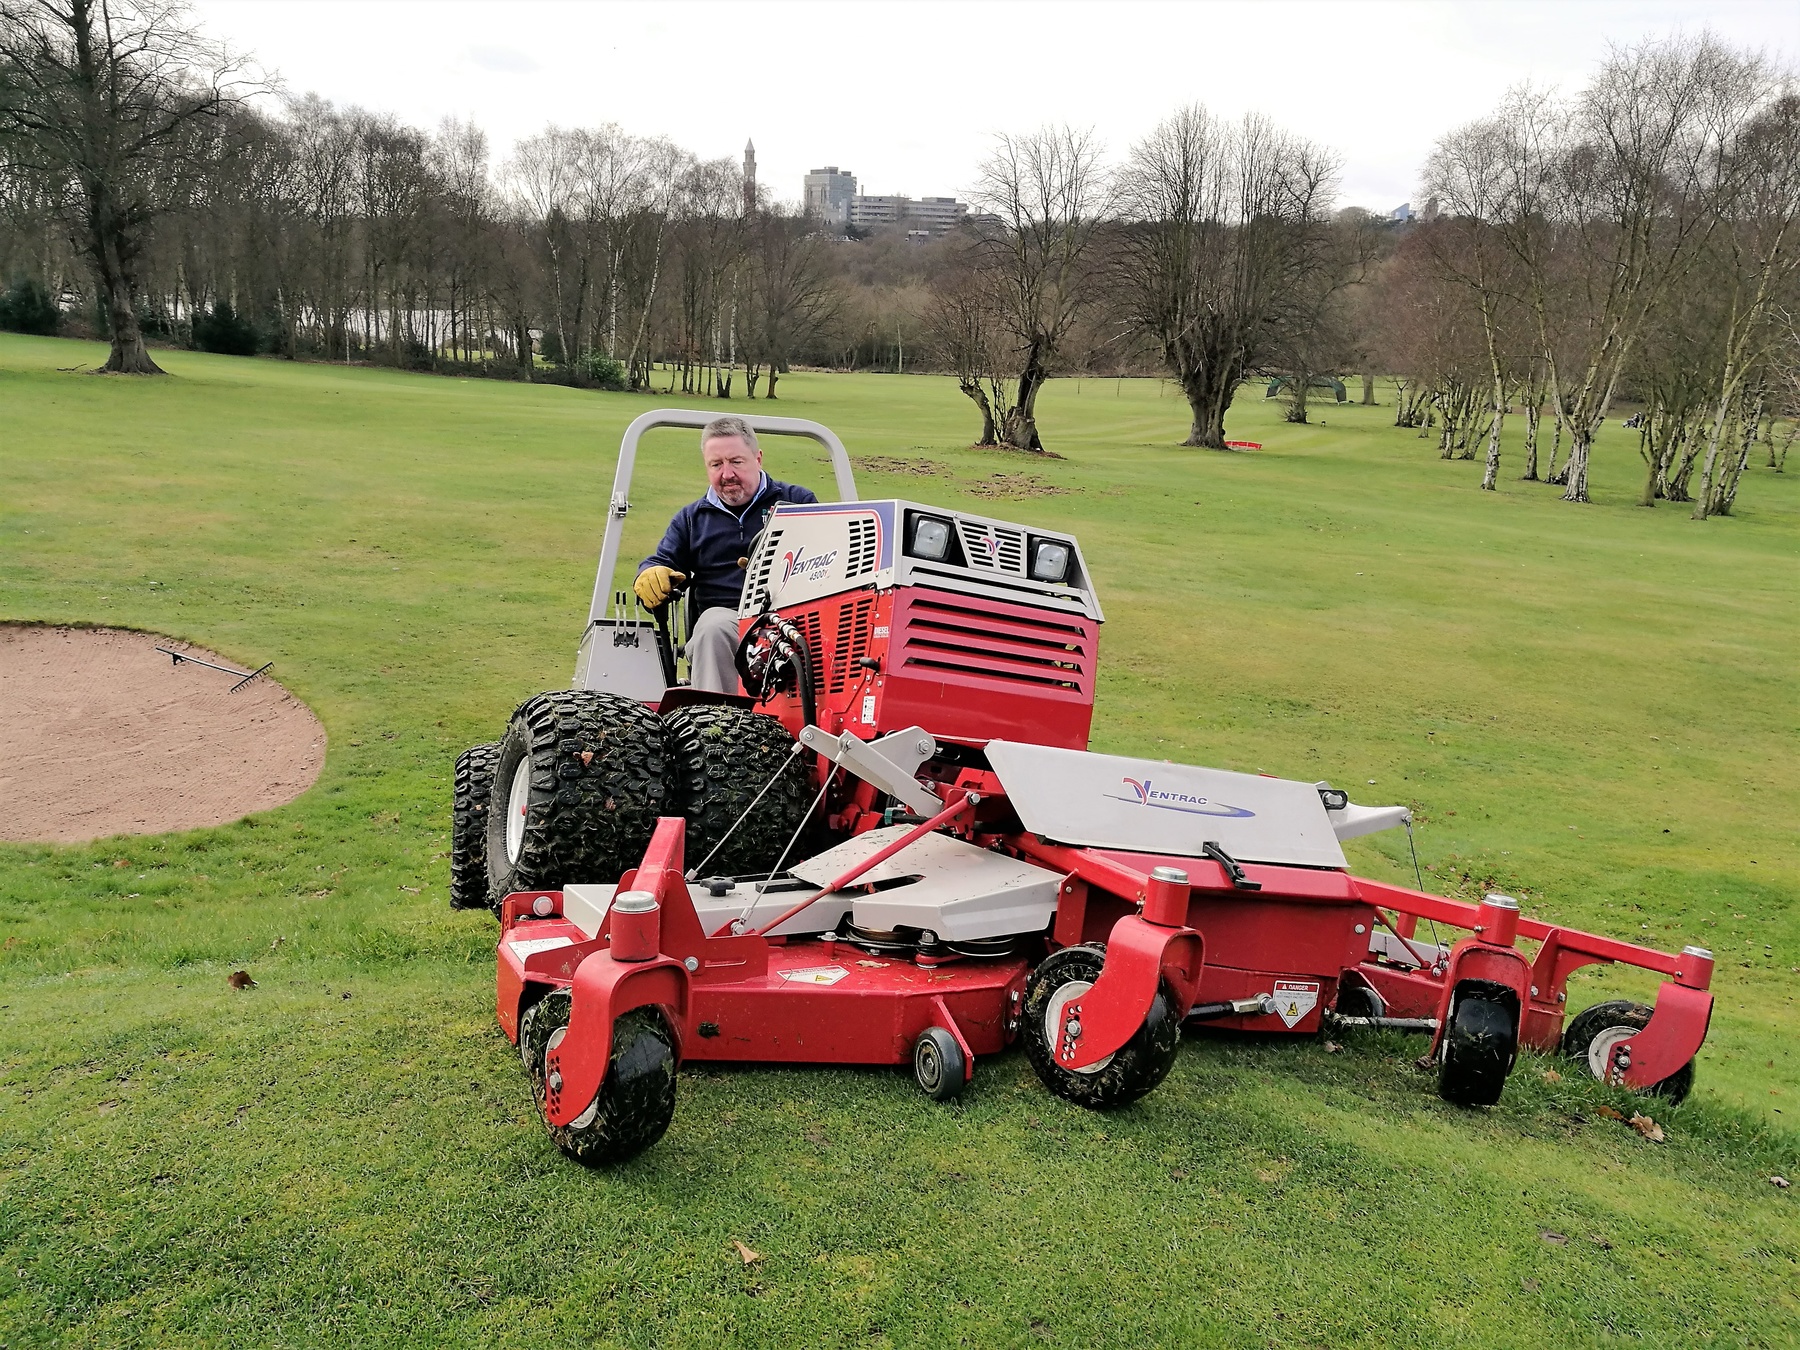 The Ventrac with contour deck proved equal to the slopes and undulations at this golf course in the West Midlands